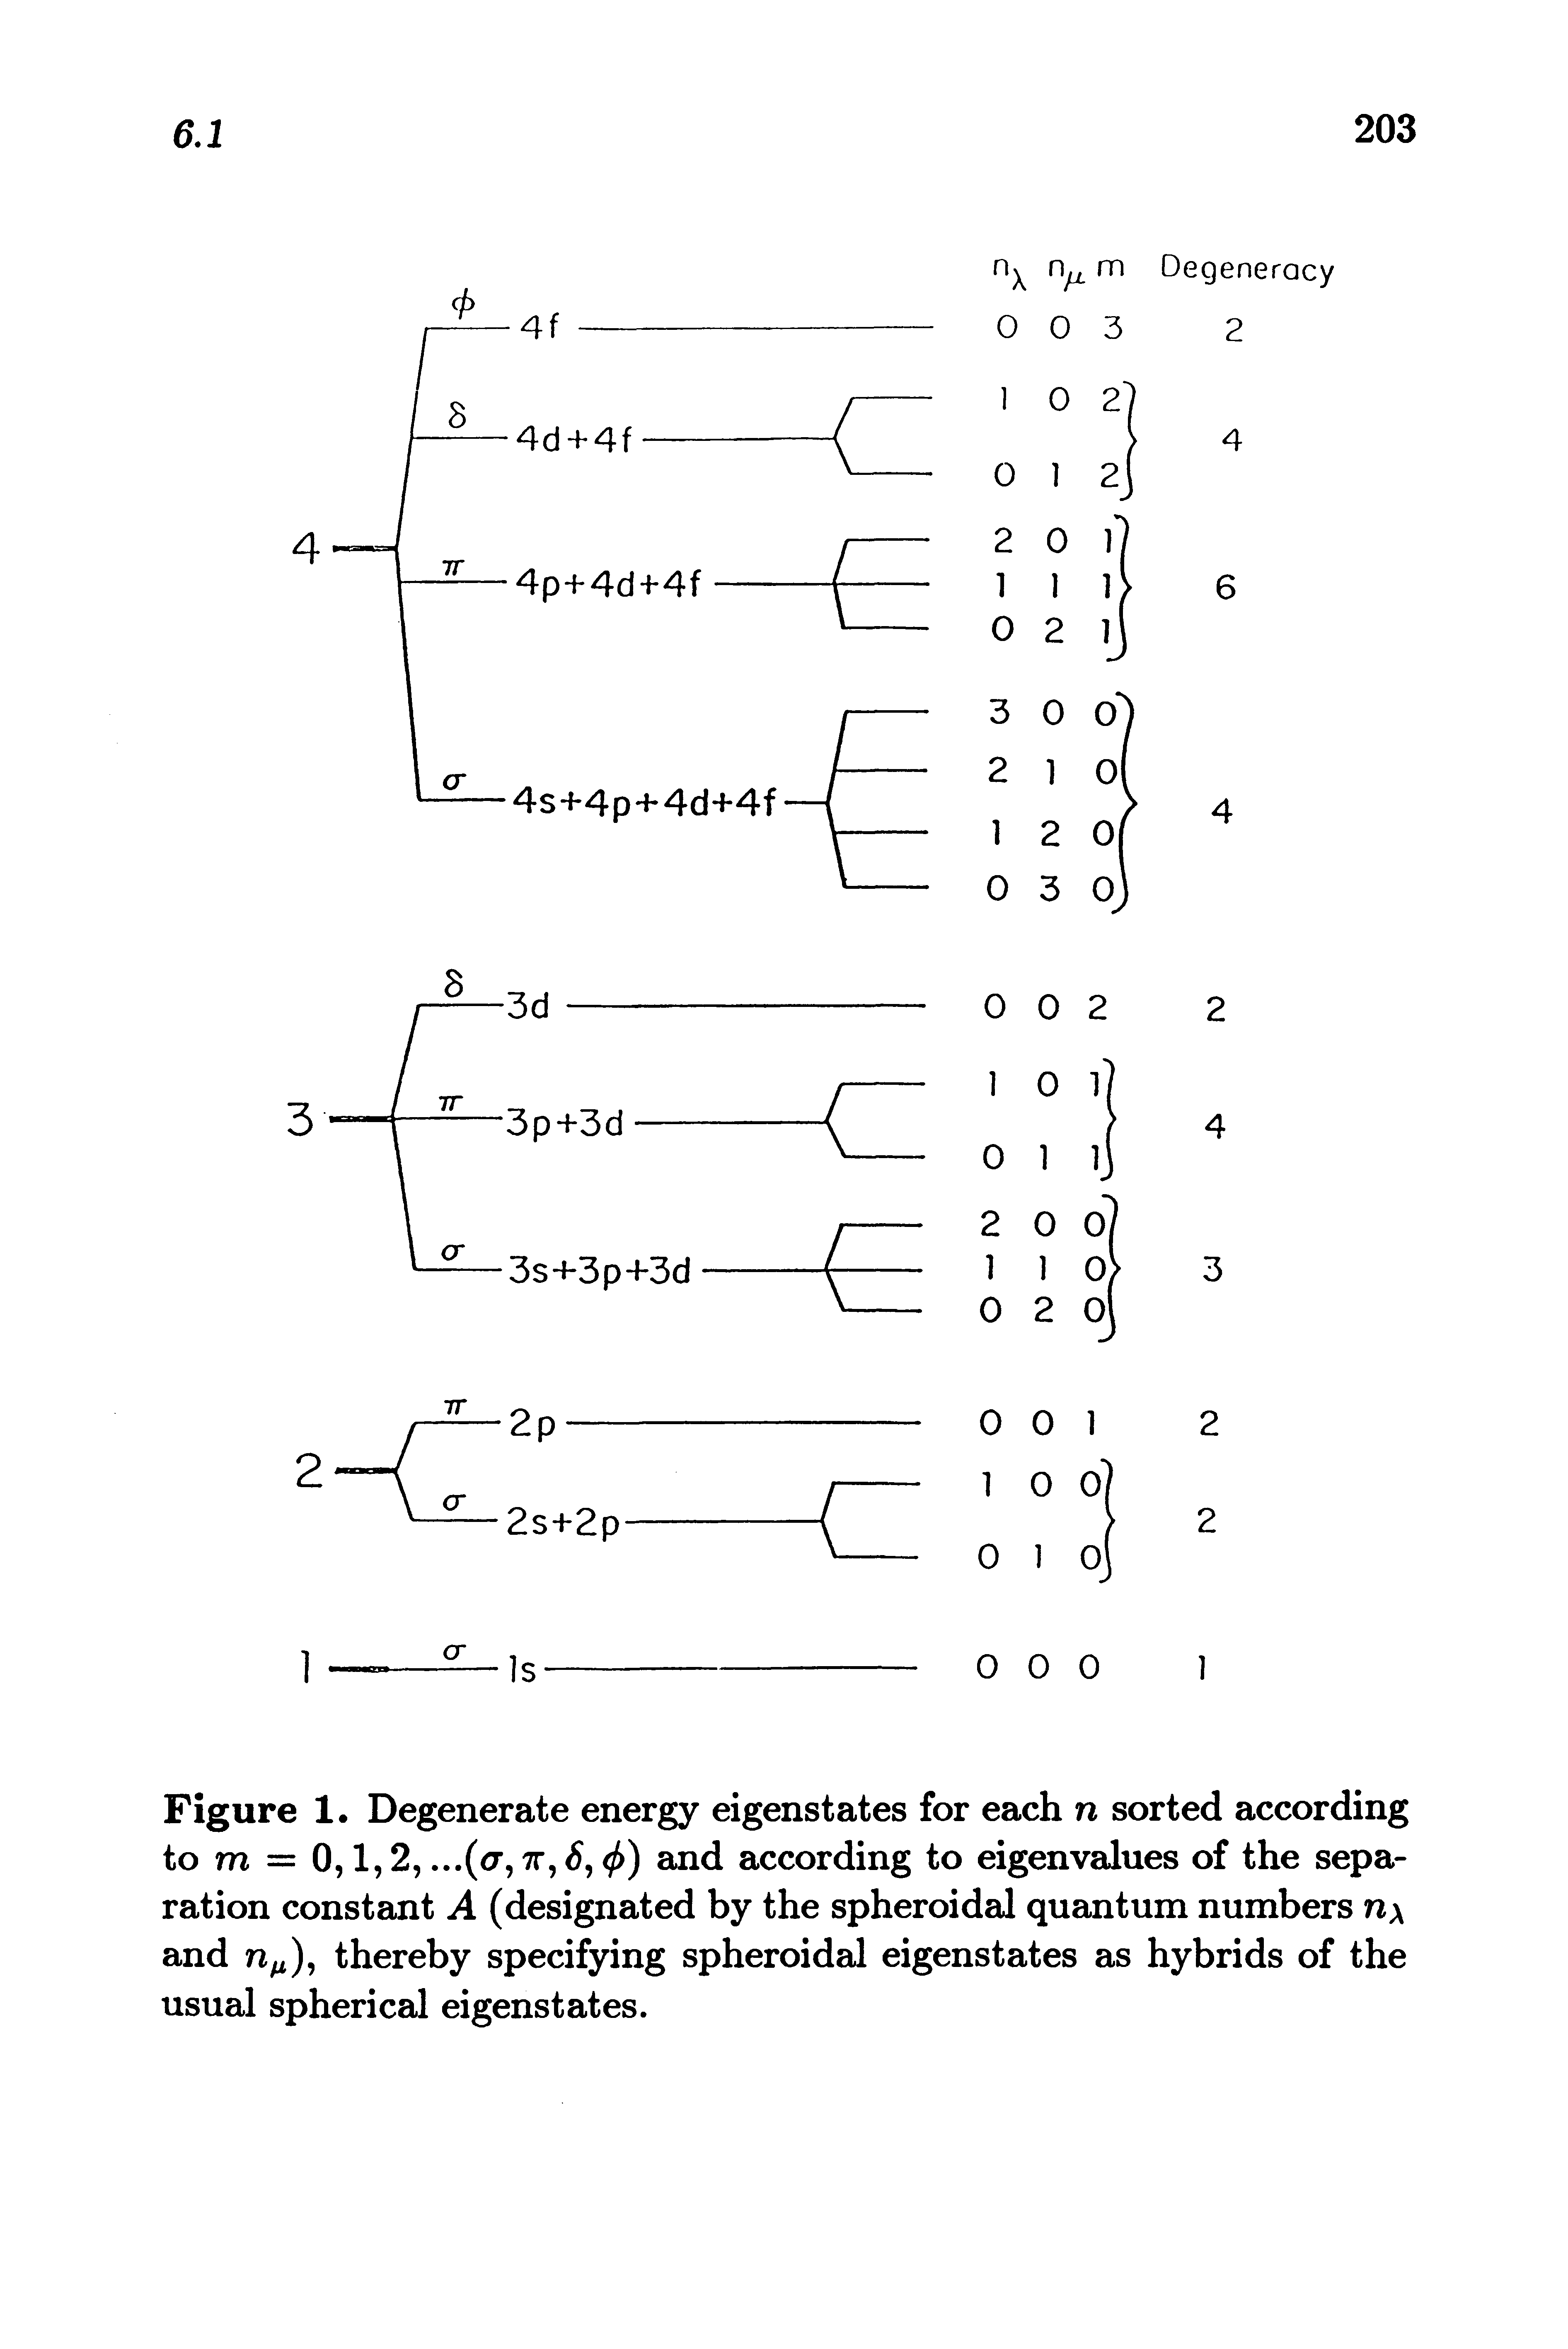 Figure 1. Degenerate energy eigenstates for each n sorted according to m = 0,1,2,. ..(<7, 7t,5, and according to eigenvalues of the separation constant A (designated by the spheroidal quantum numbers n and n ), thereby specifying spheroidal eigenstates as hybrids of the usual spherical eigenstates.